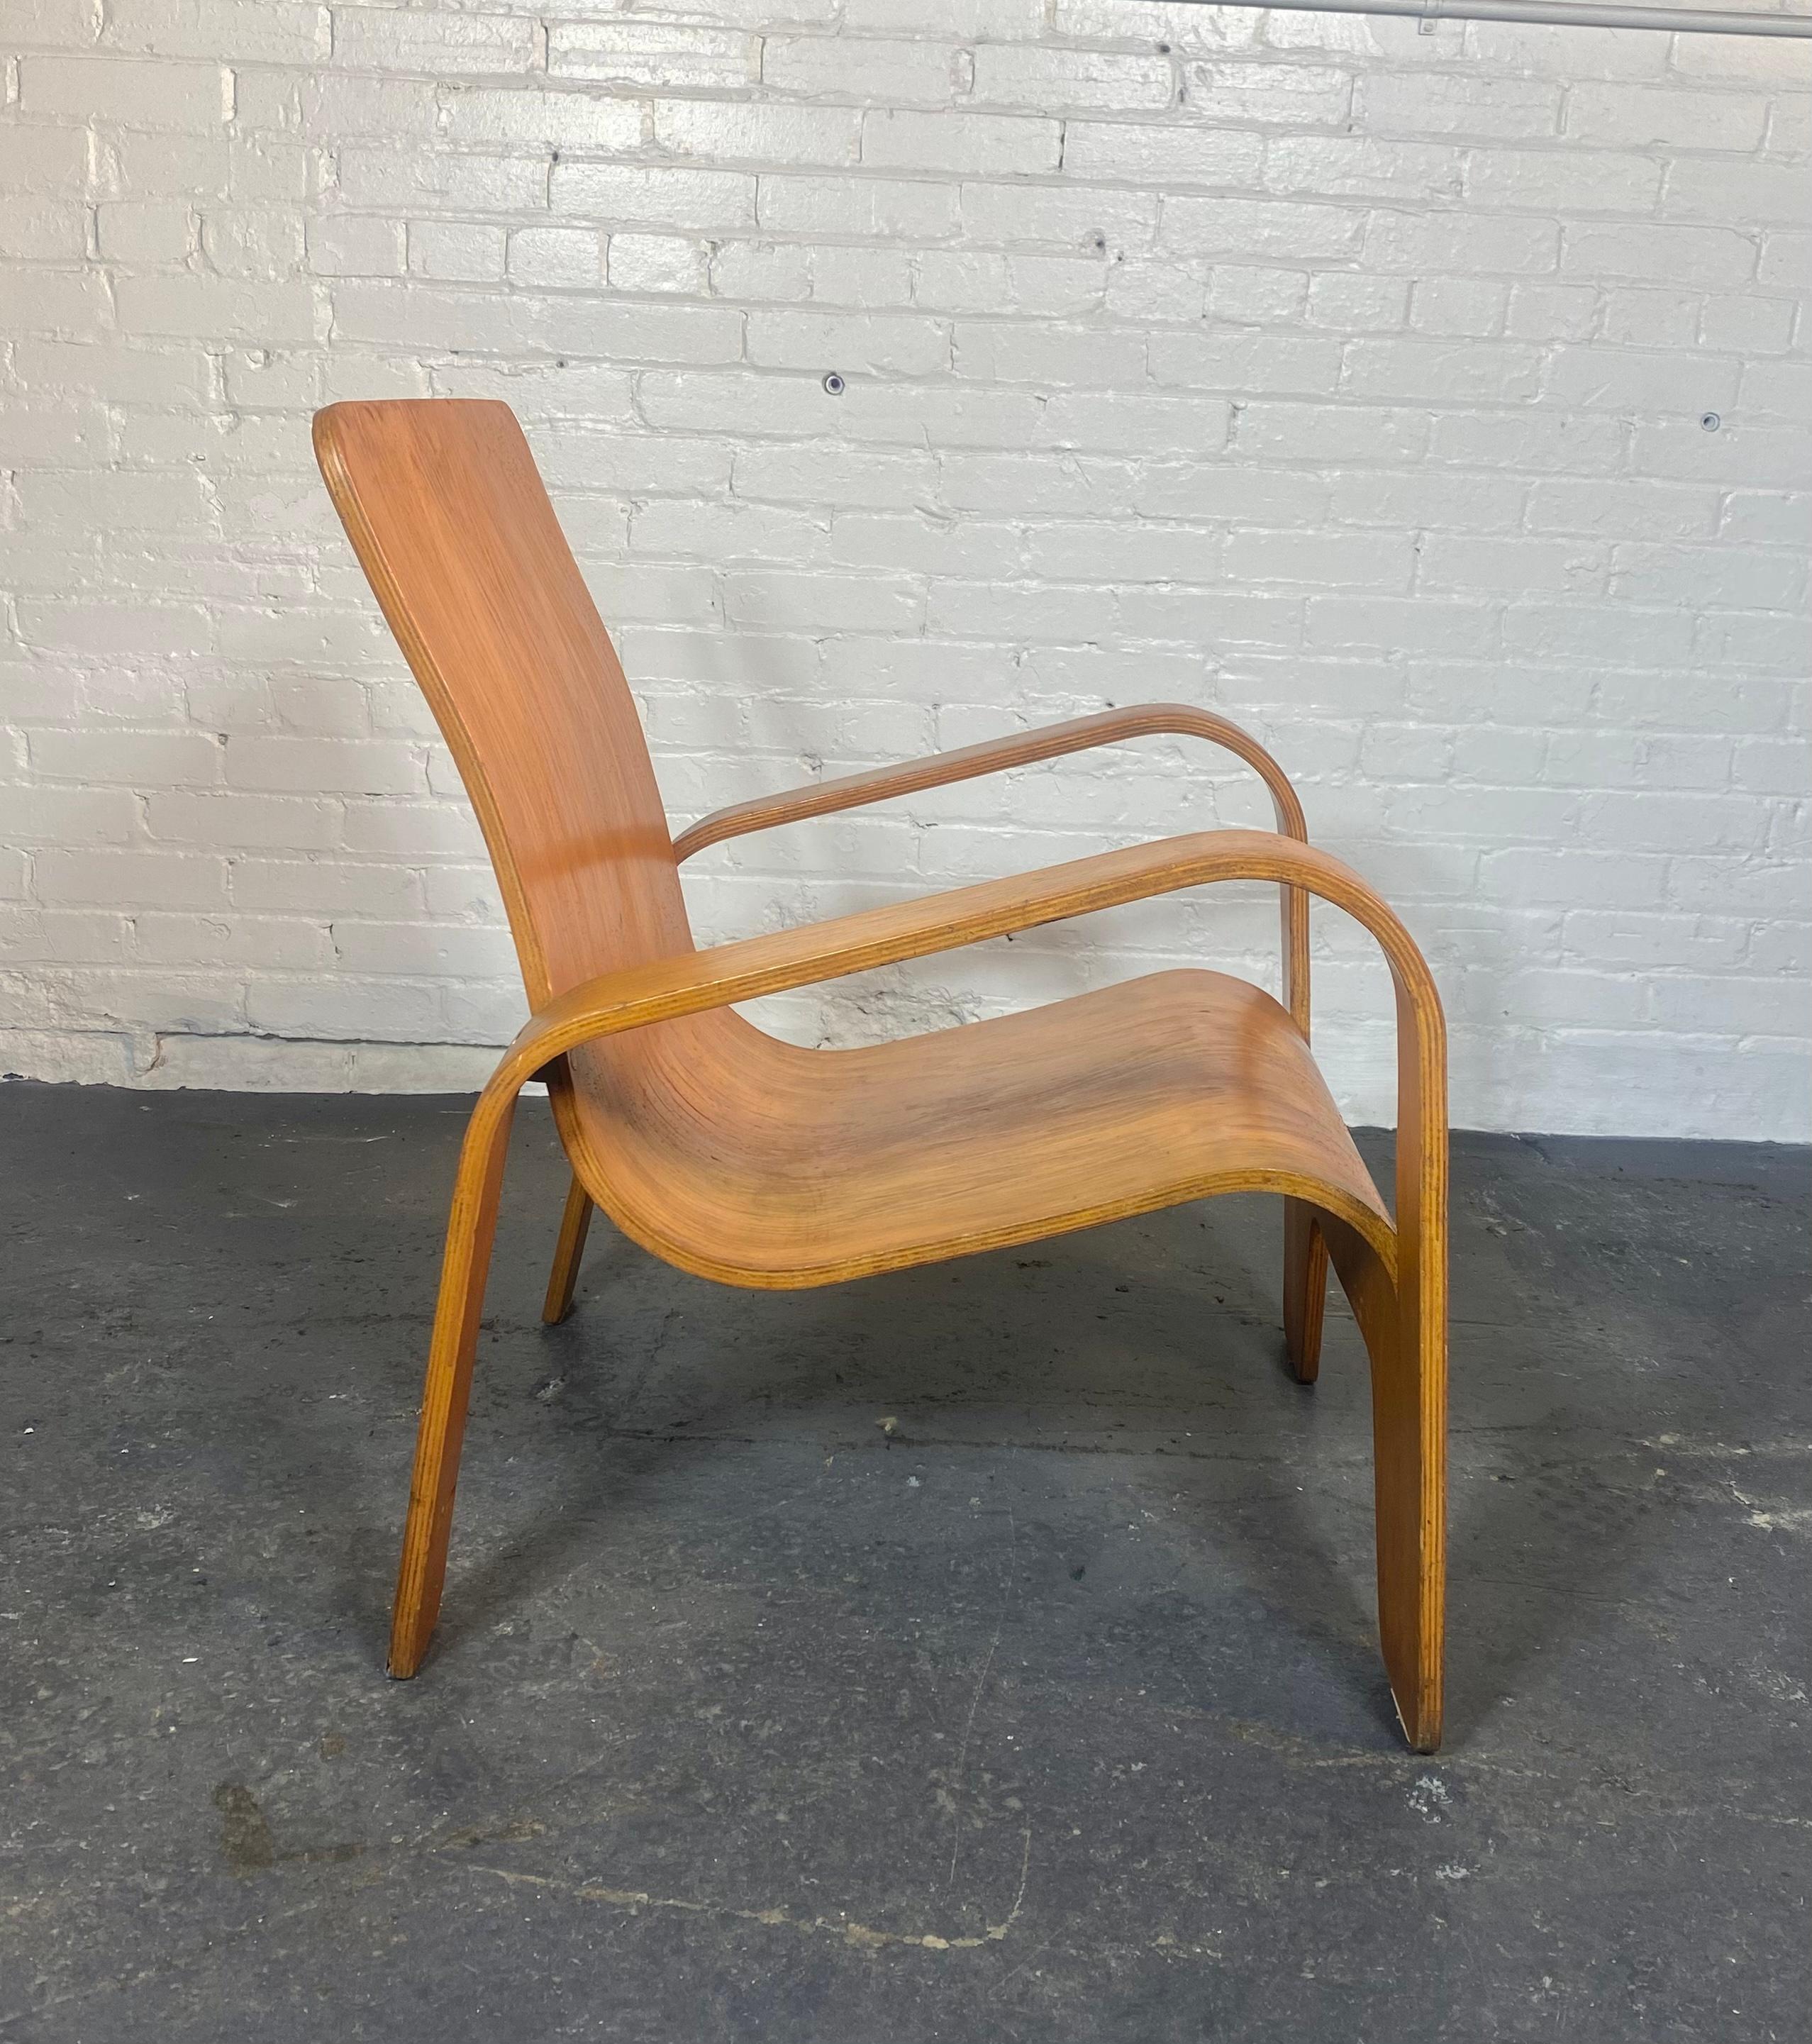 Mid-20th Century LaWo1 Molded Plywood Lounge Chair by Han Pieck for Lawo Ommen/ Netherlands 1945 For Sale